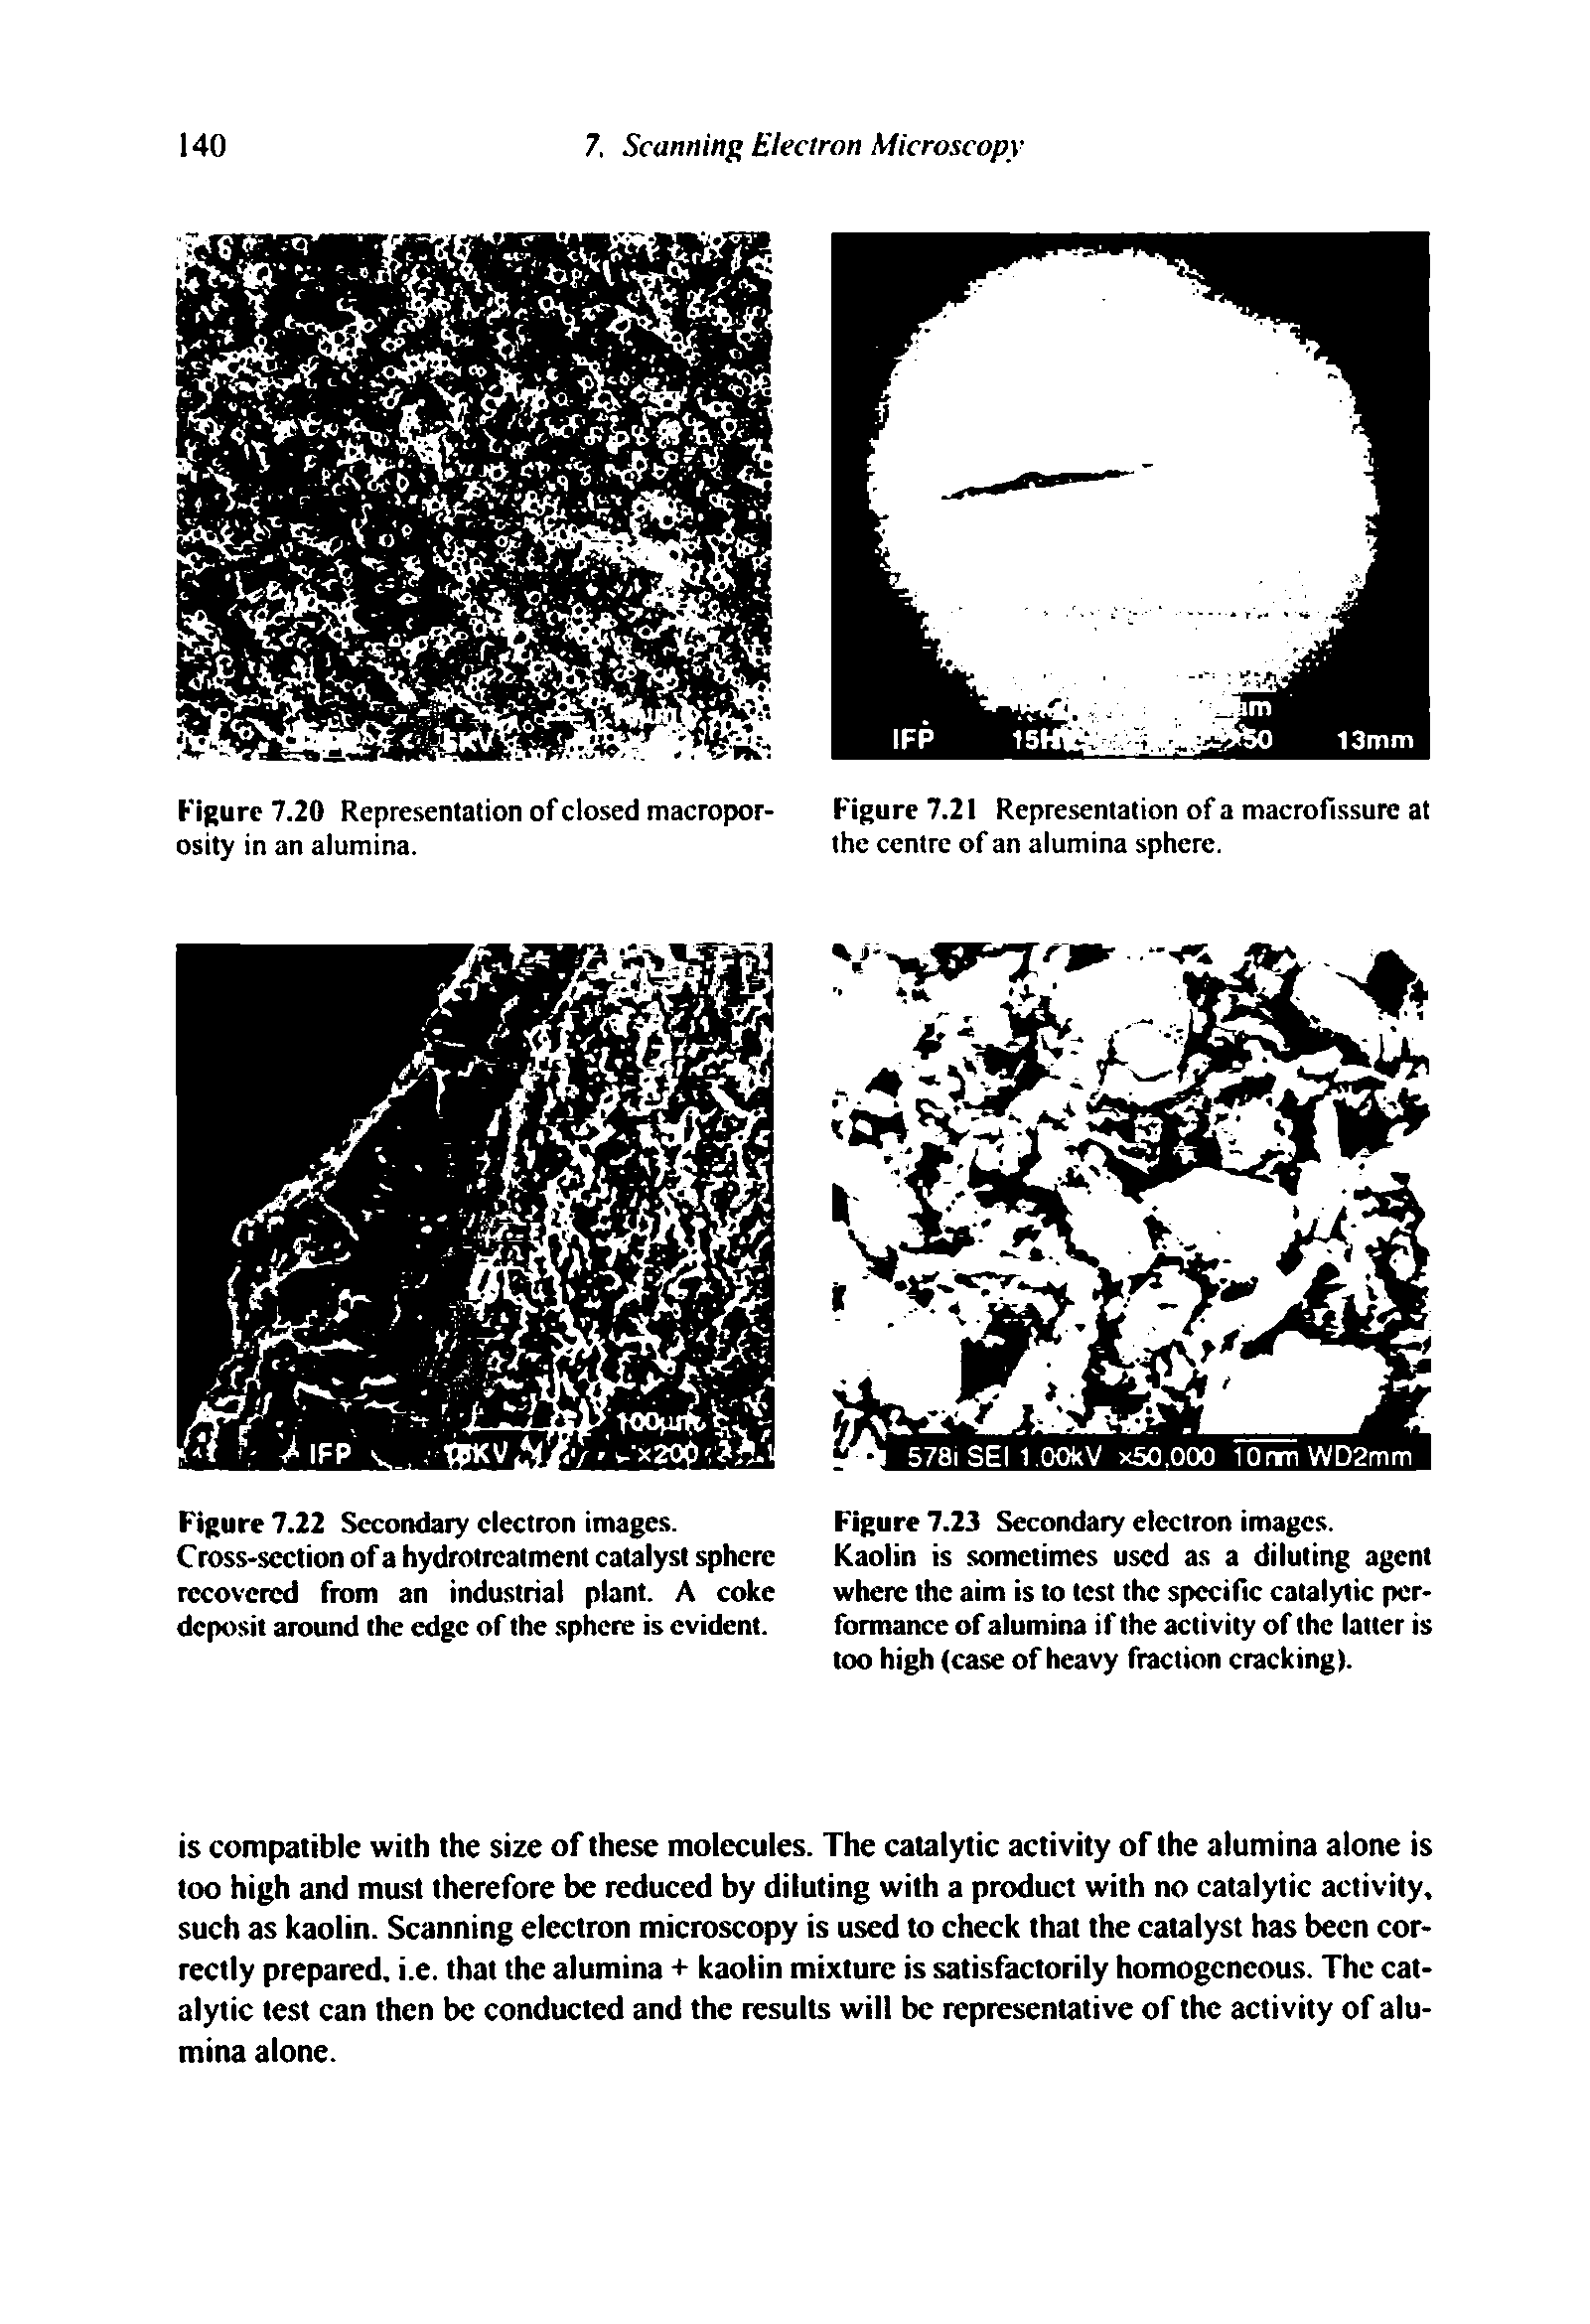 Figure 7.22 Secondary electron images. Cross-section of a hydrotreatment catalyst sphere recovered from an industrial plant. A coke deposit around the edge of the sphere is evident.